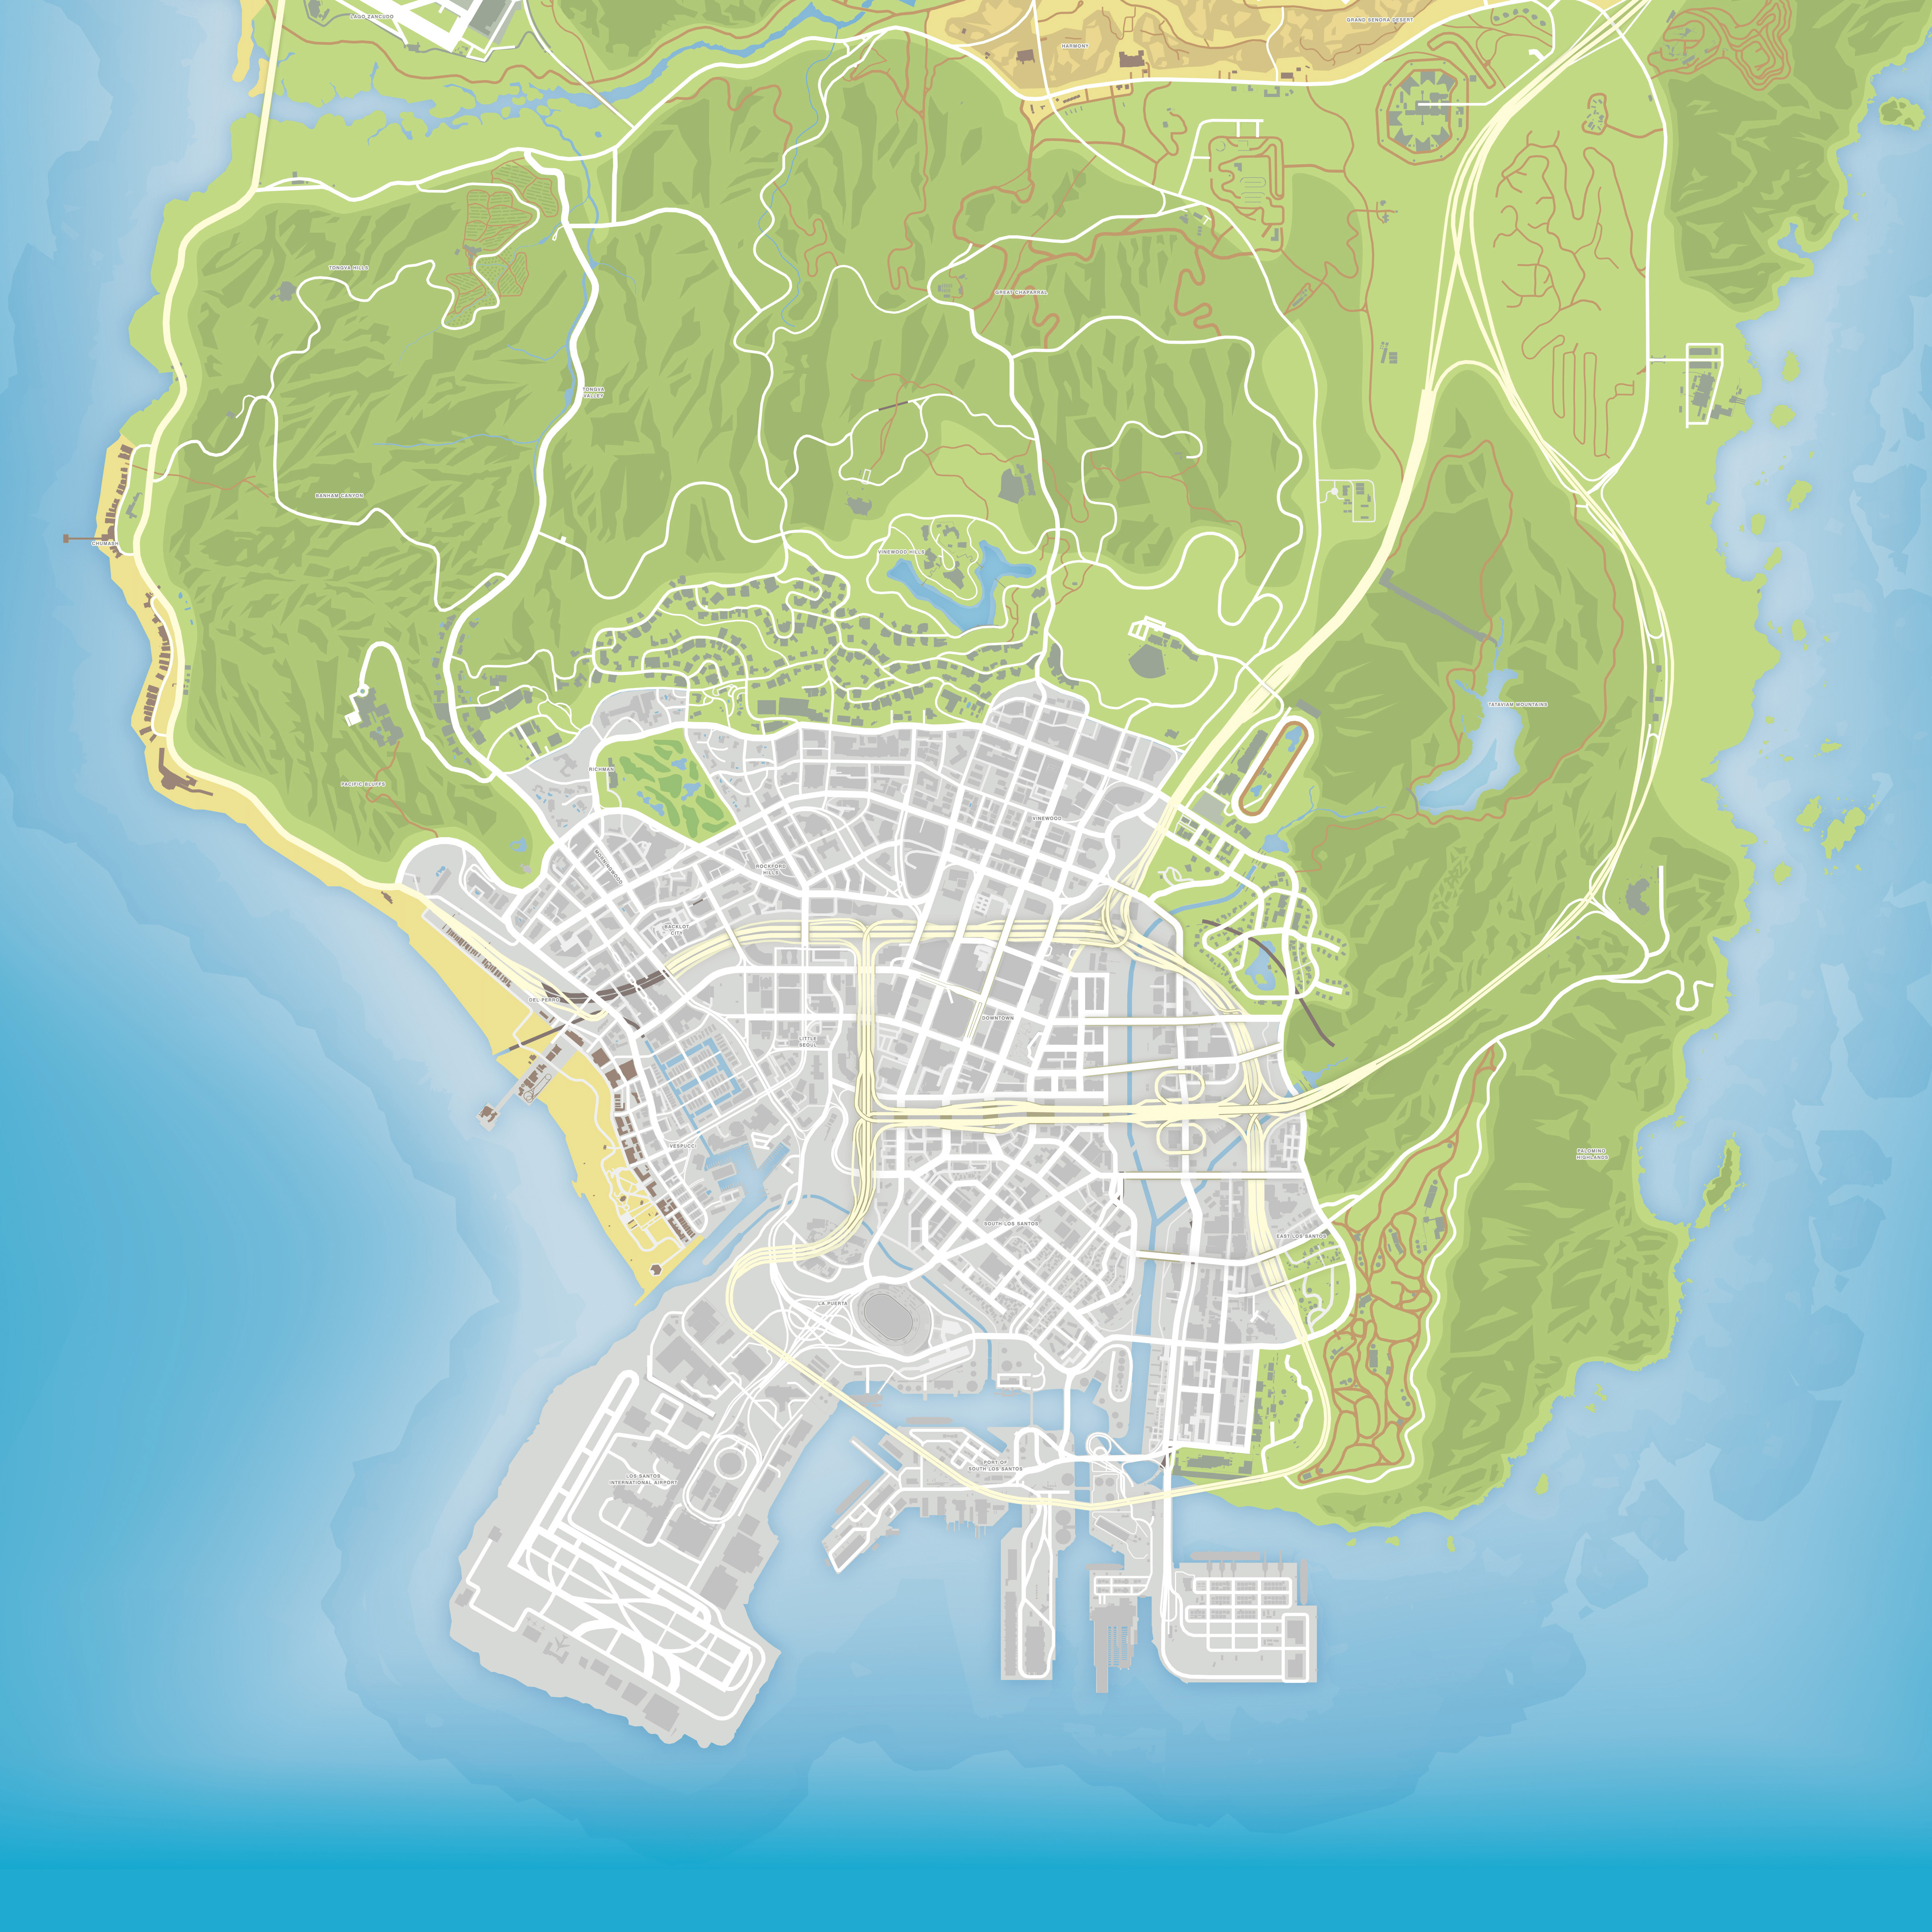 Is this the official GTA 5 Los Santos map?